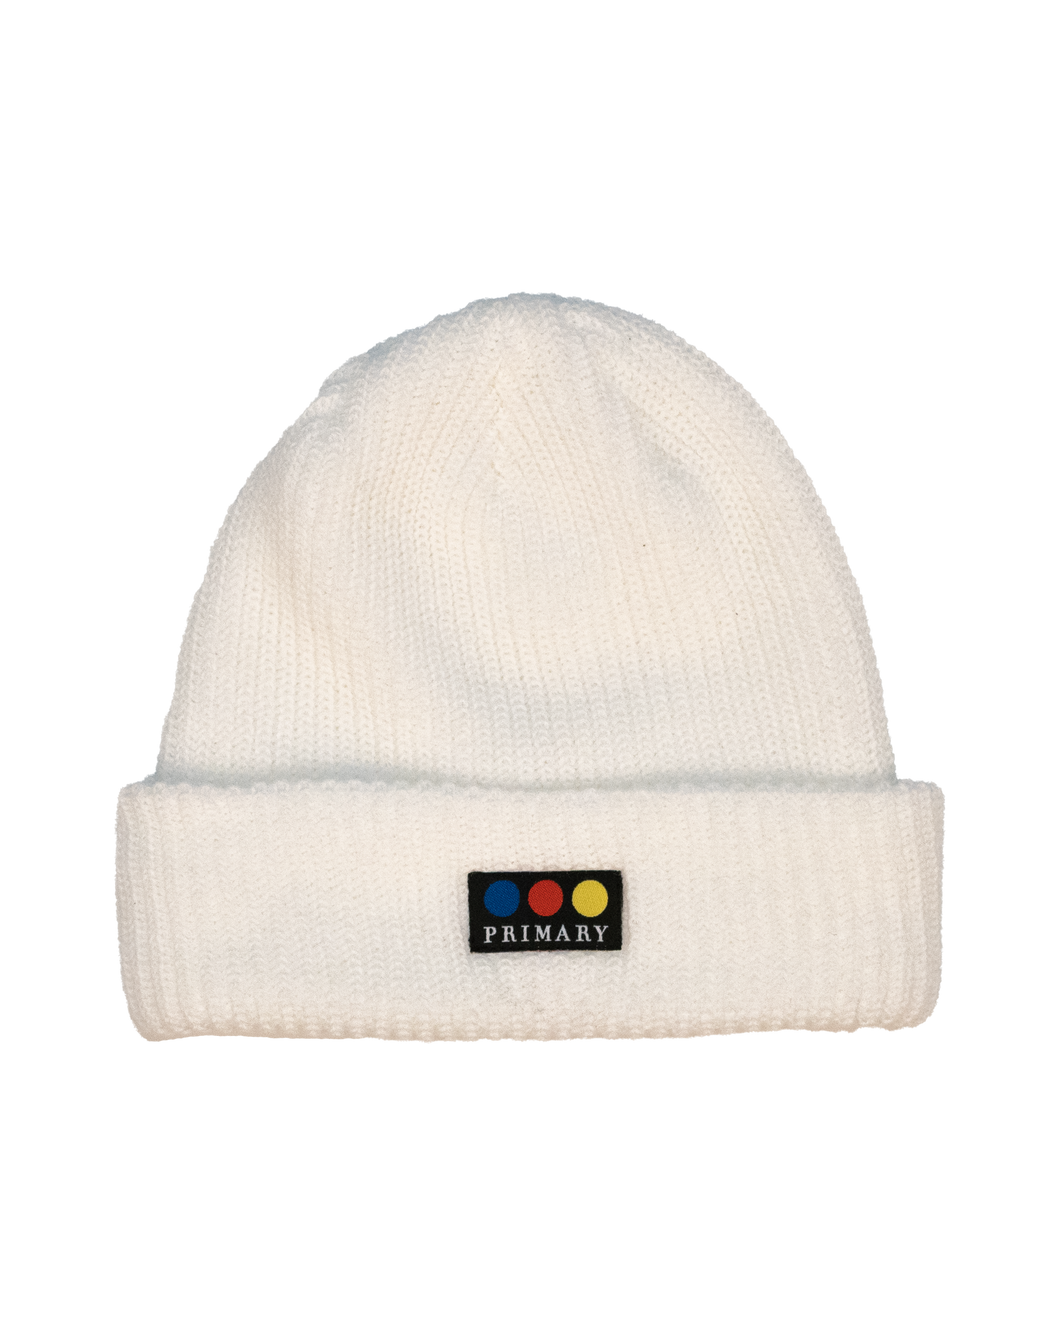 Primary skateboards - Watchman Ribbed Beanie in White